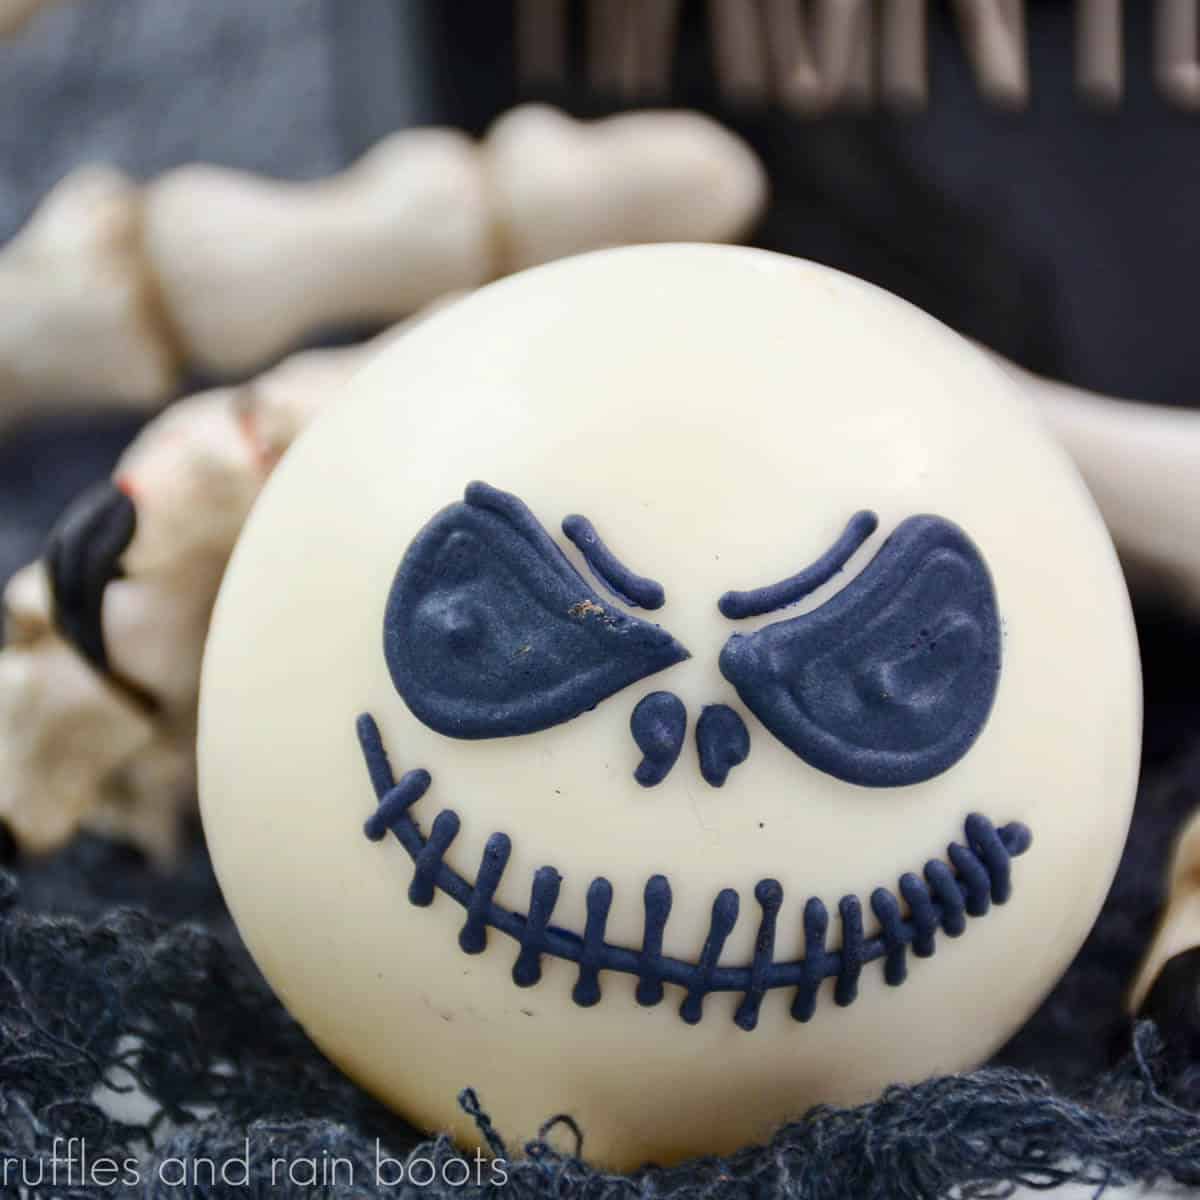 square close up image of a white hot cocoa bomb with a black royal icing face of Jack Skellington from the Nightmare Before Christmas